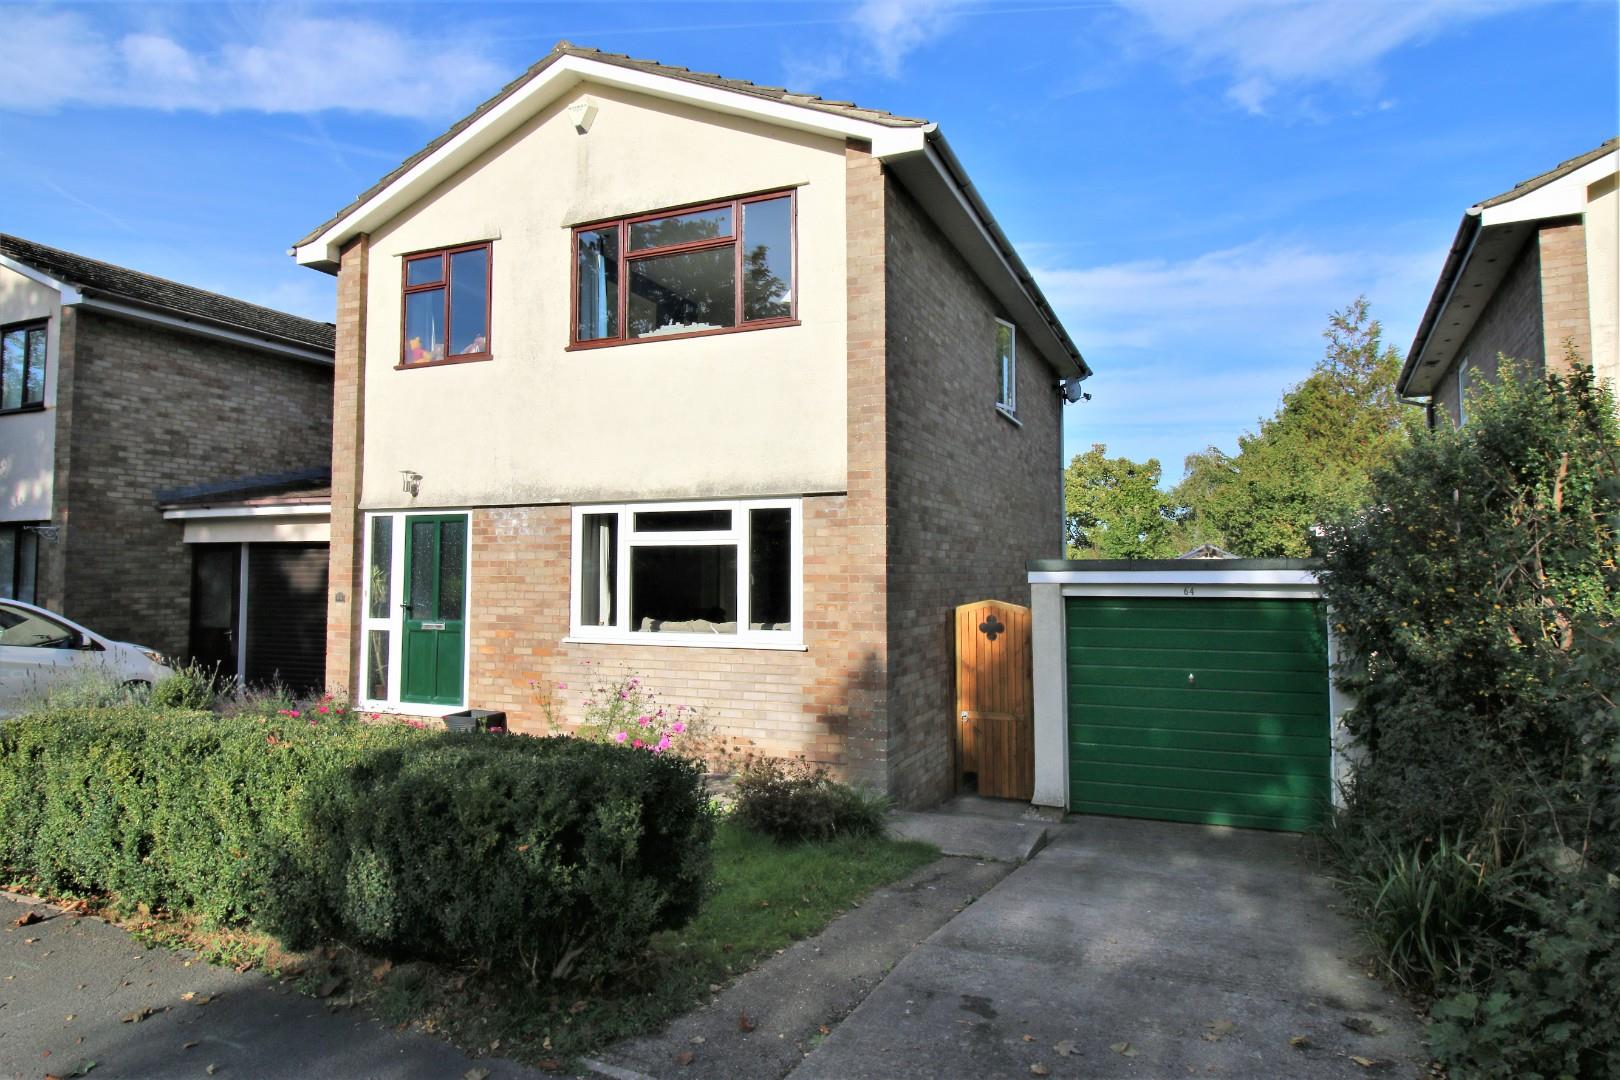 Detached four bedroom family home with large garden, backing onto open fields